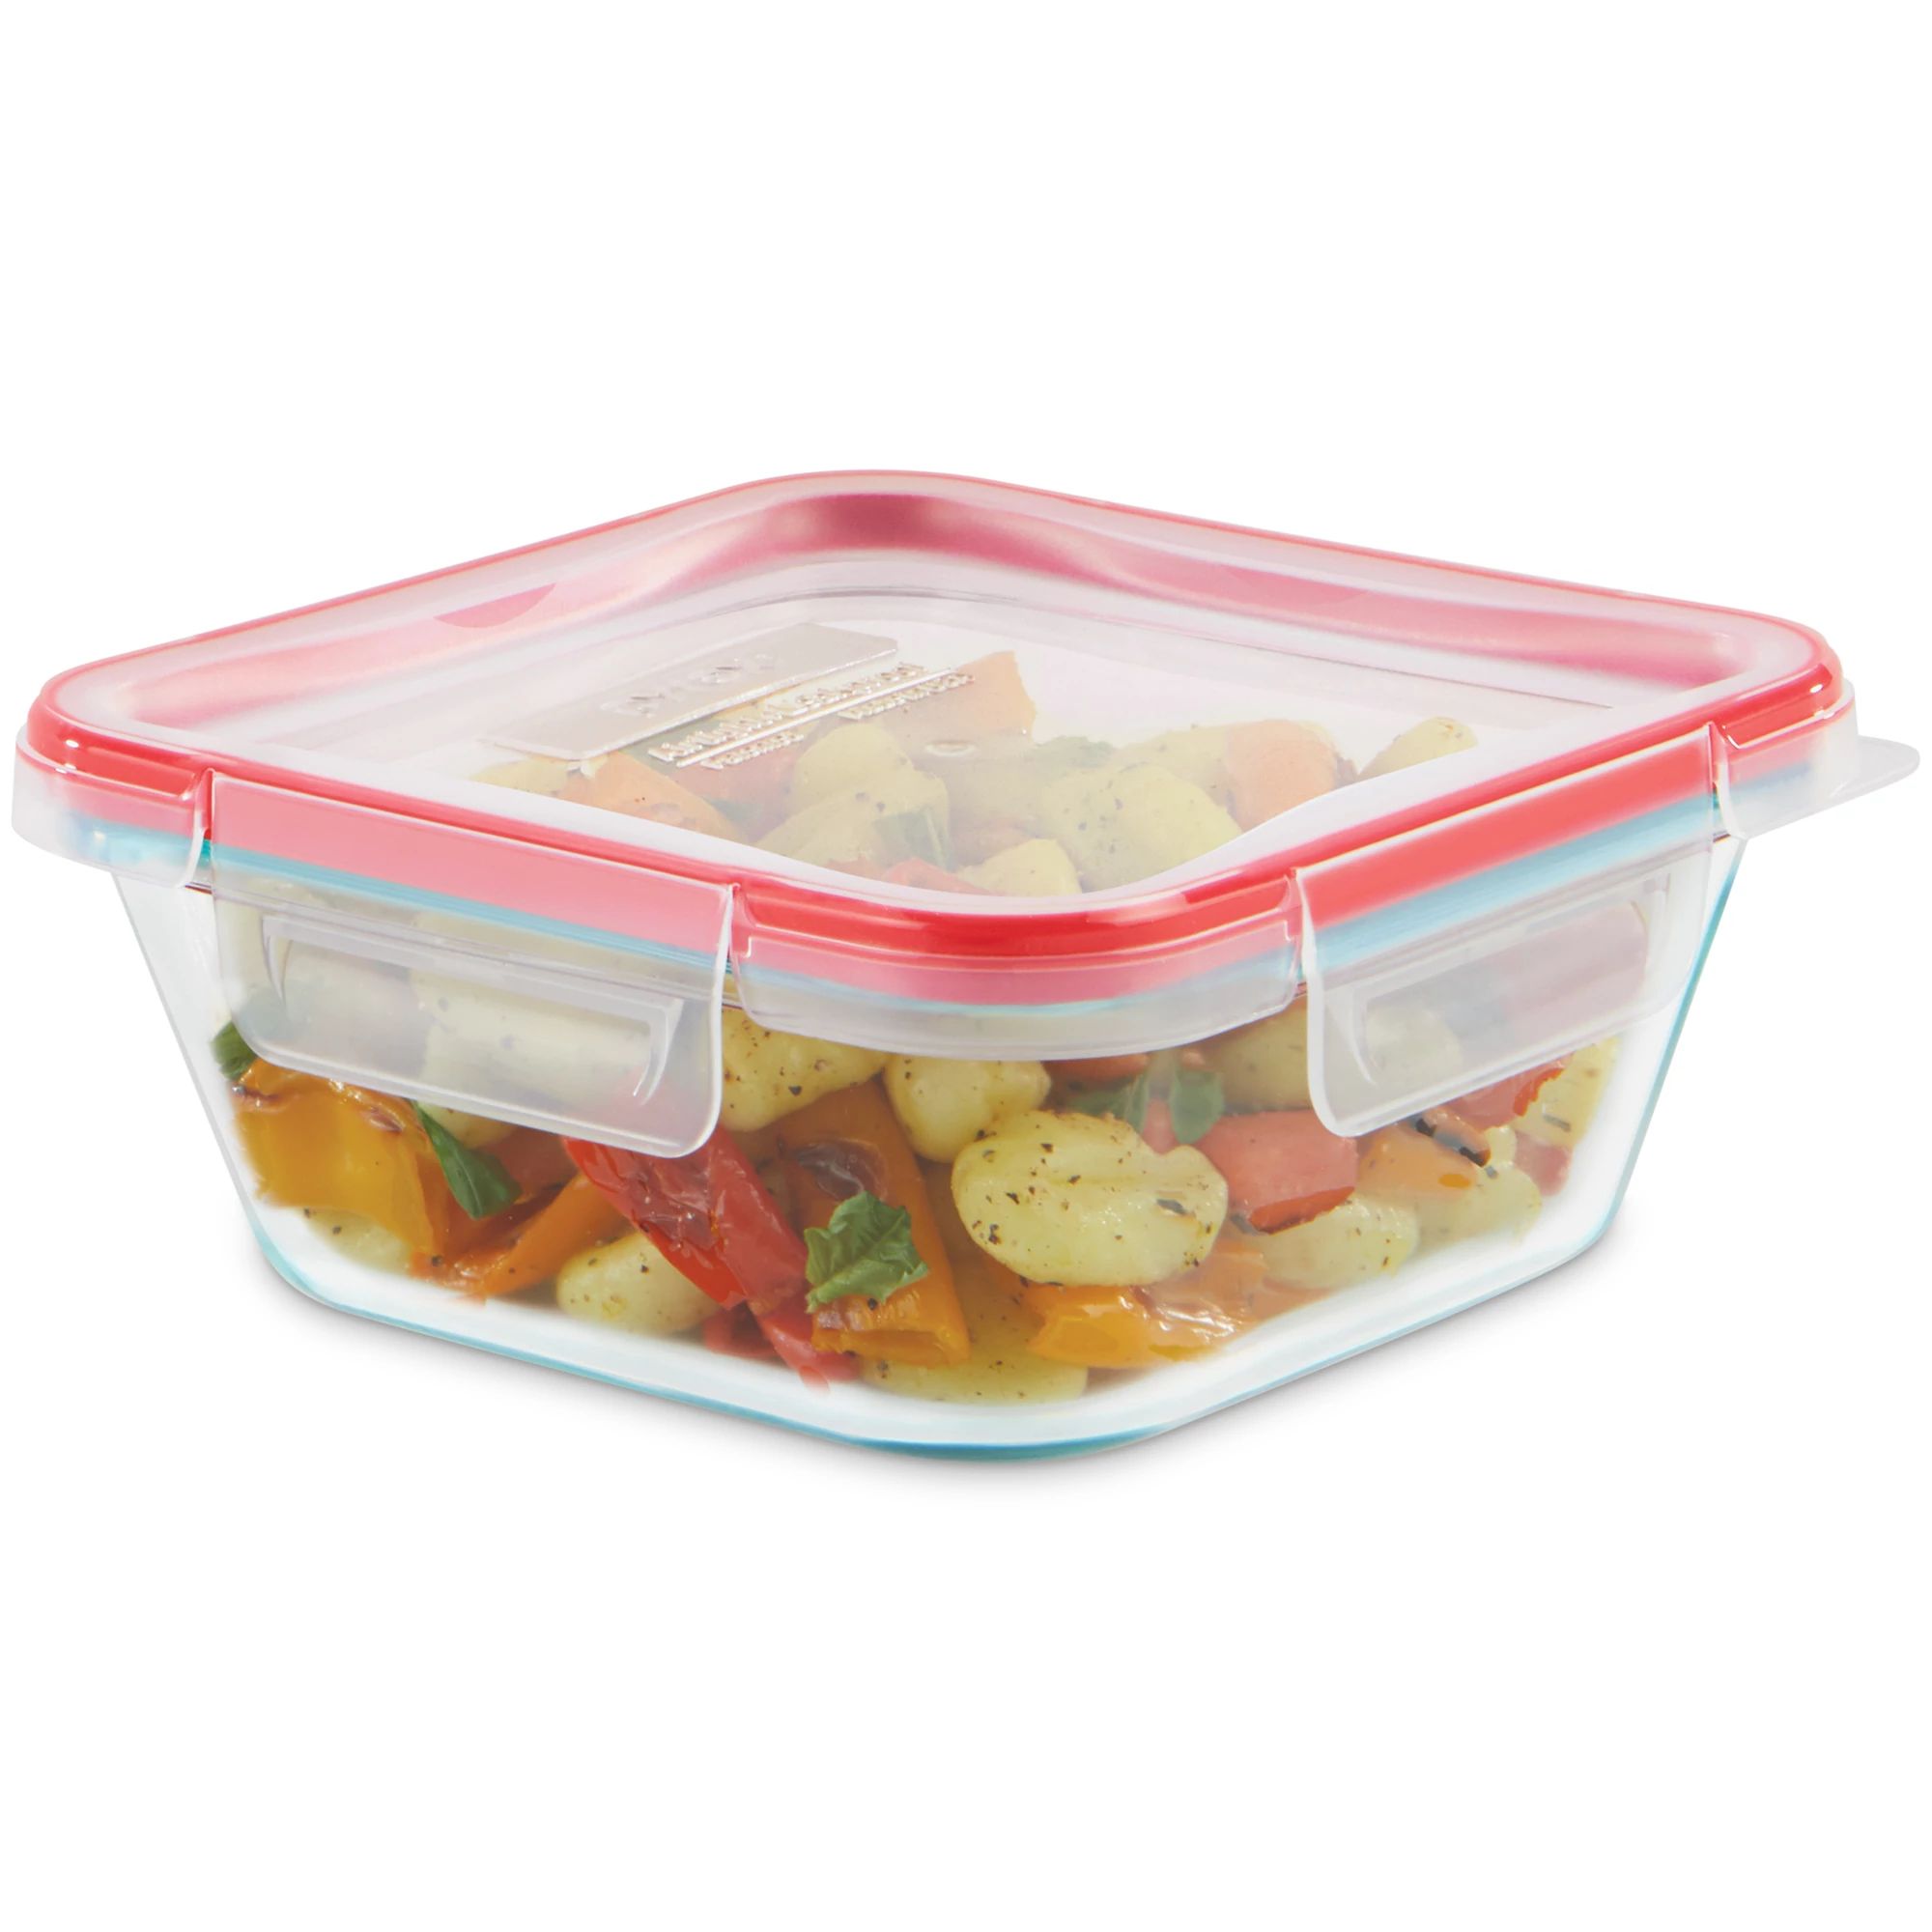  Snapware Total Solution 24-Pc Glass Food Storage Container Meal  Prep Set with Plastic Lids, 4-Cup, 2-Cup & 1-Cup, BPA-Free Lids with 4  Locking Tabs, Microwave, Dishwasher, and Freezer Safe: Home 